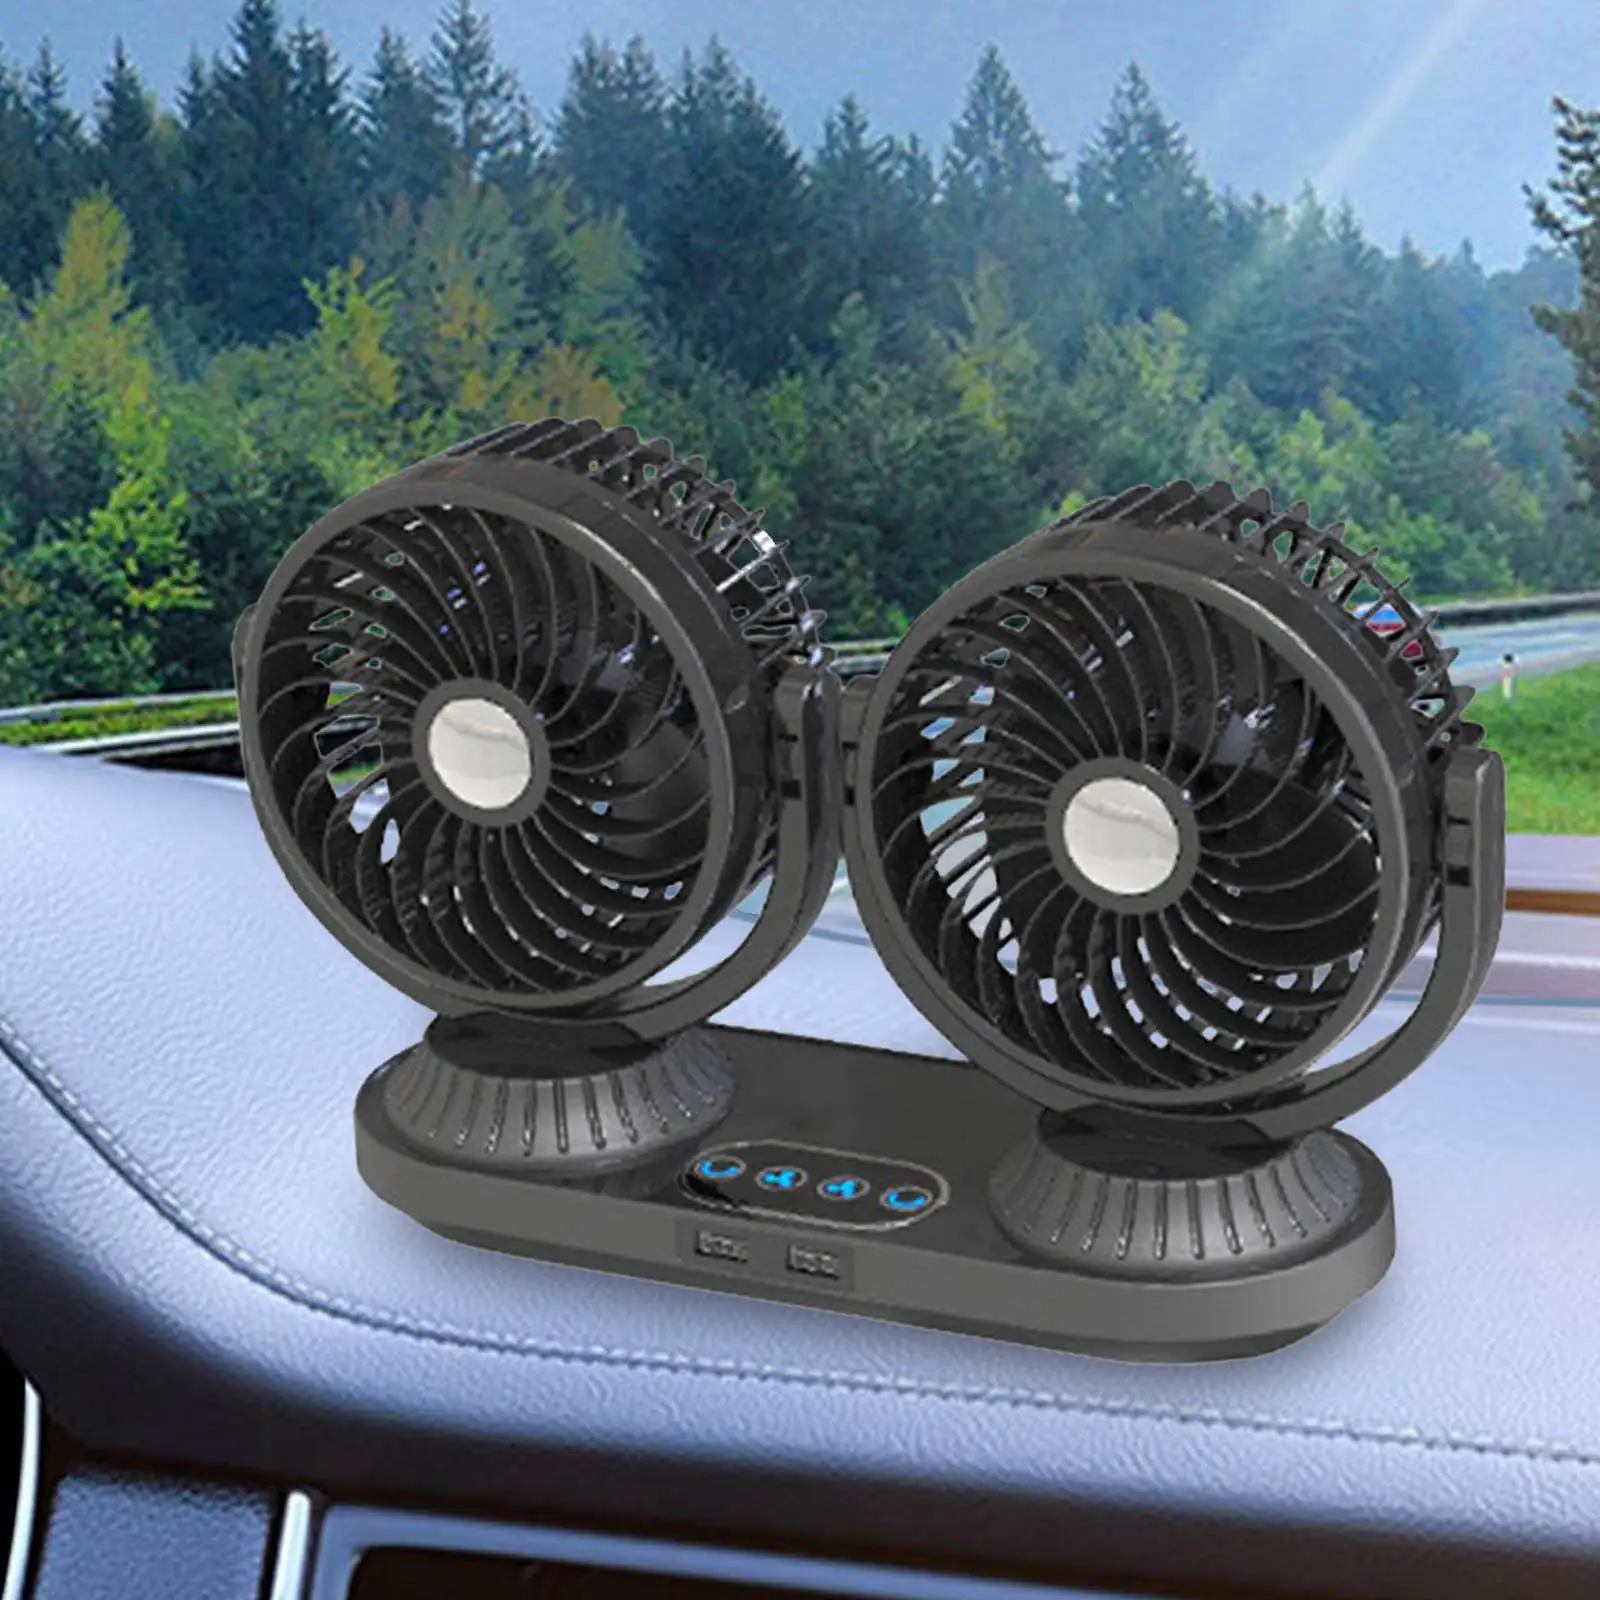 Dual Heads Car Fan for 12V 24V Vehicles 3 Speeds Adjustable Electric 180 up and Down Adjustment 360 Rotatable Auto Cooling Fan